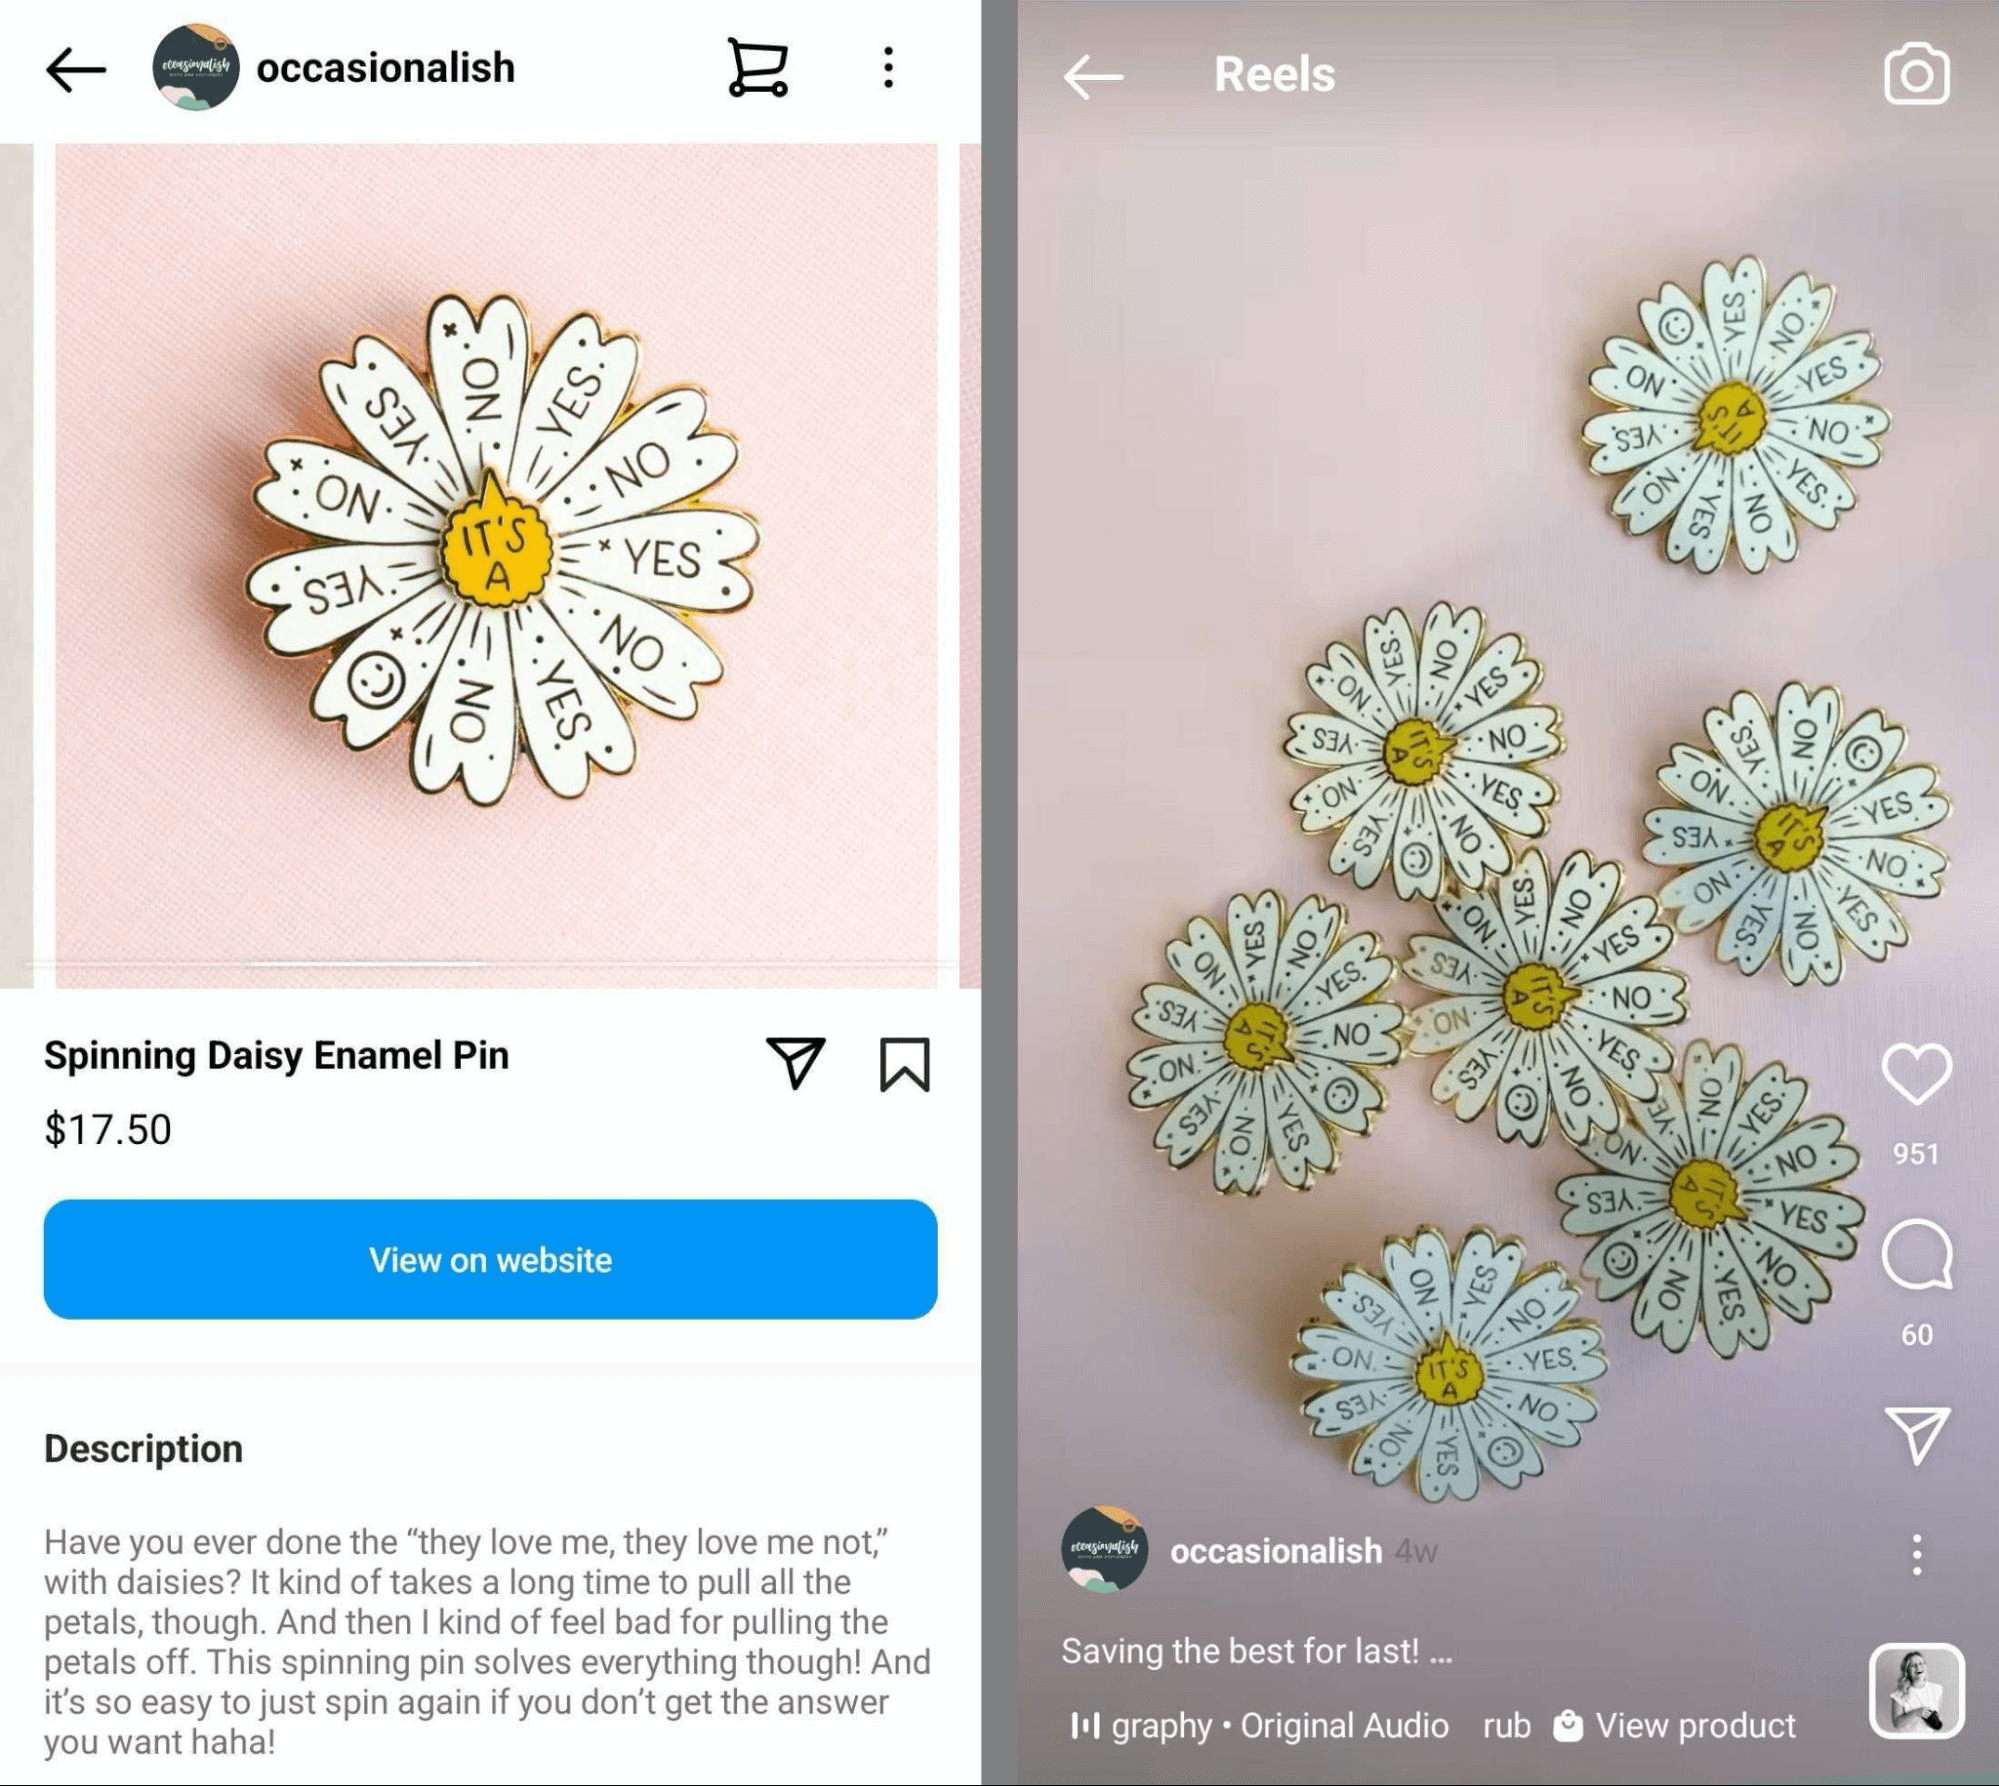 image of the same product in an Instagram shop and Instagram reel